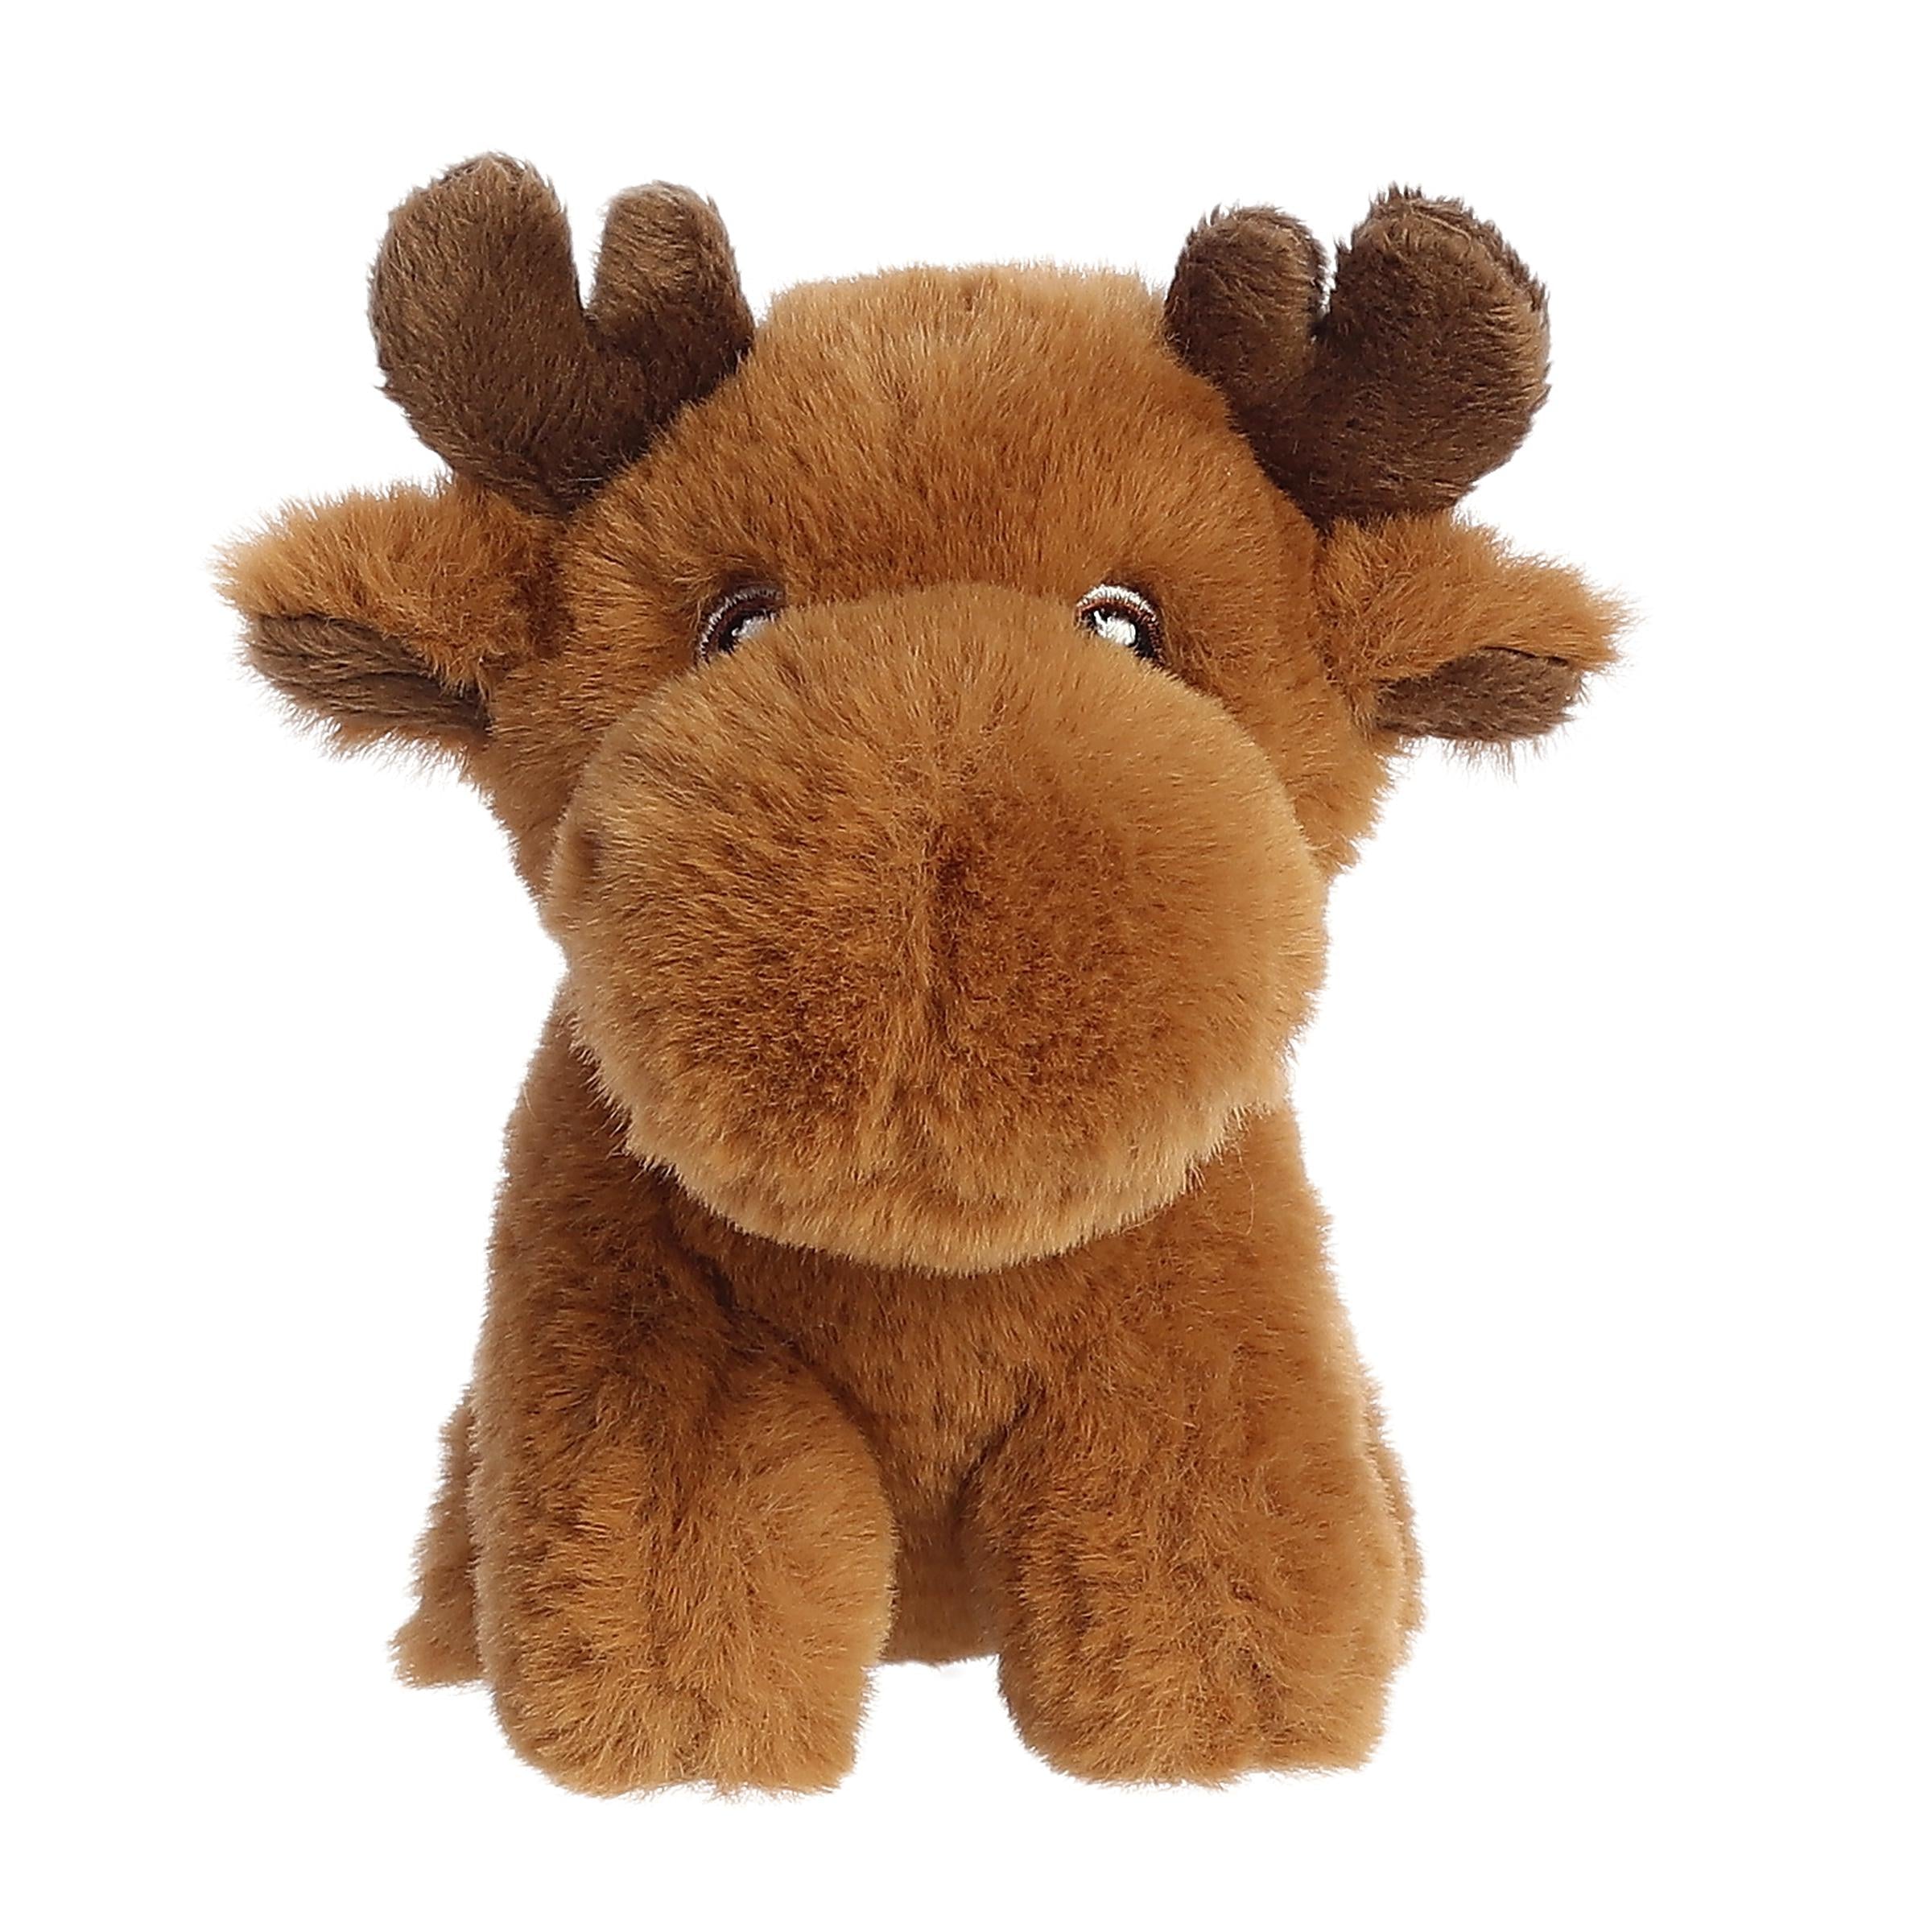 Winsome mini moose plush with a milk-chocolate brown coat and antlers, caring embroidered eyes, and an eco-nation tag